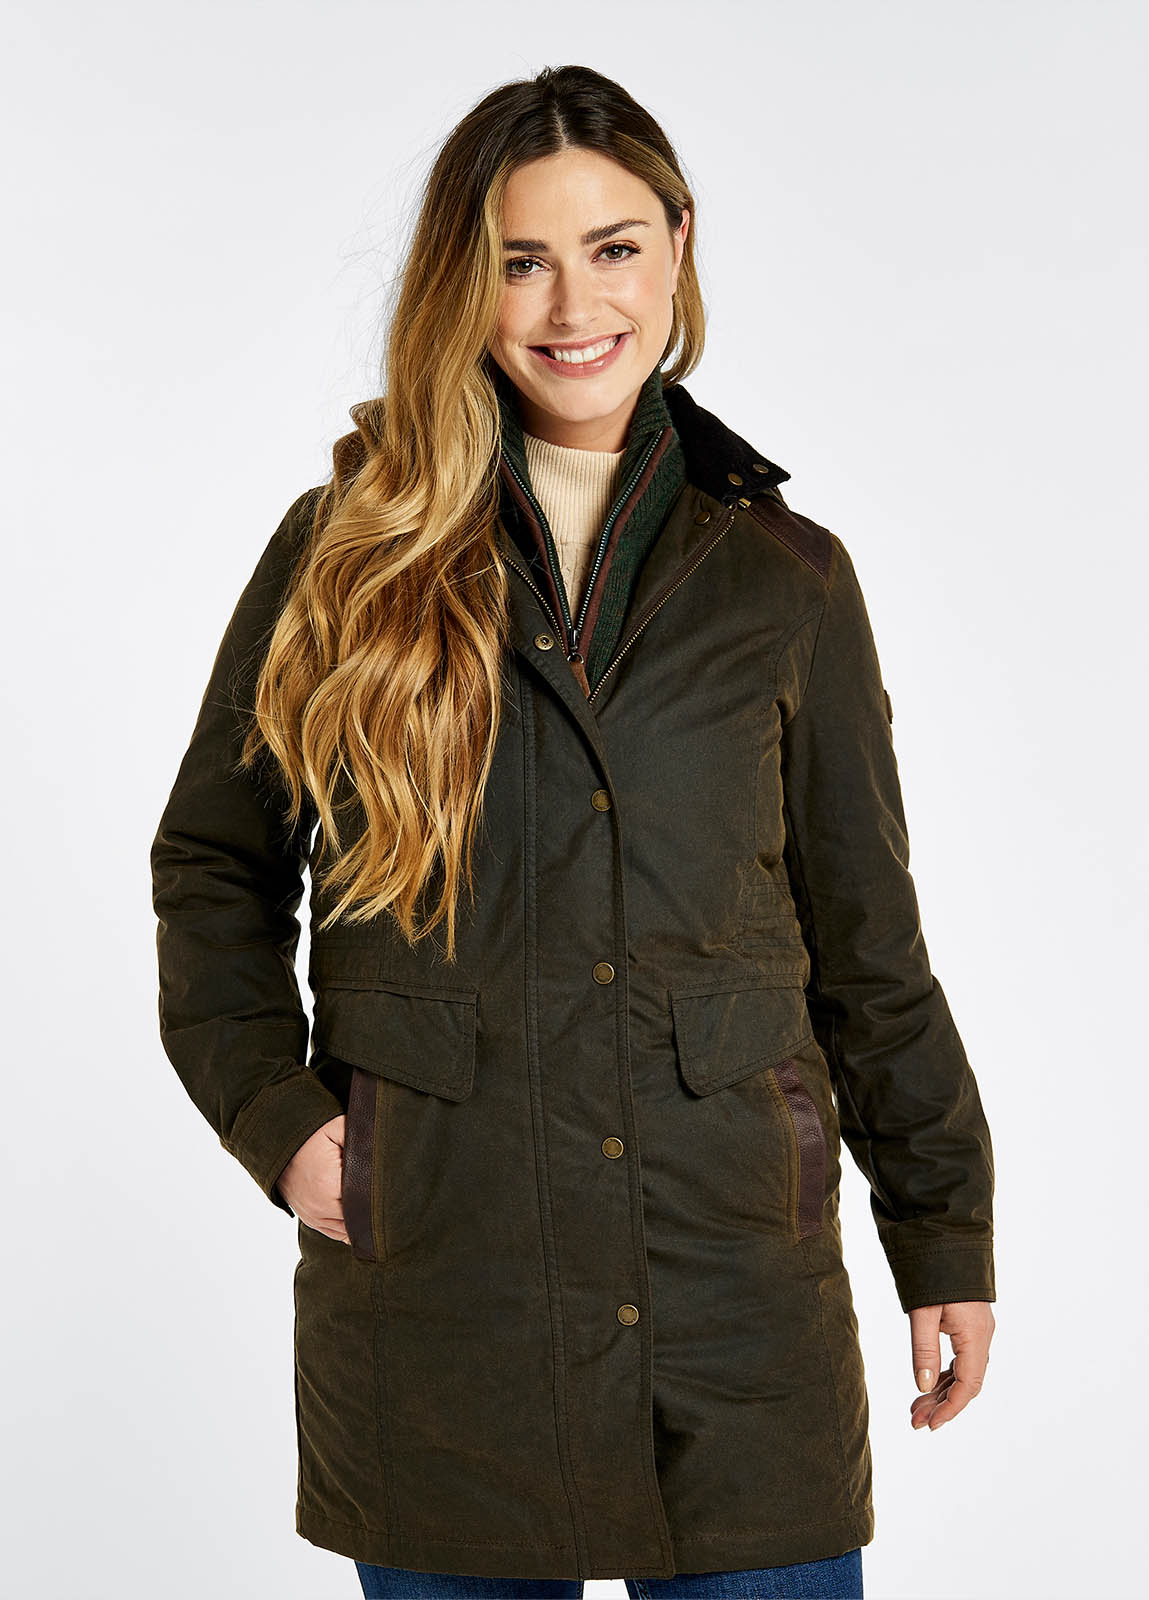 Waist up view of a female model wearing a Dubarry Blacklion Waxed cotton jacket, olive brown colour mid length coat with zip, buttons and mutiple pockets